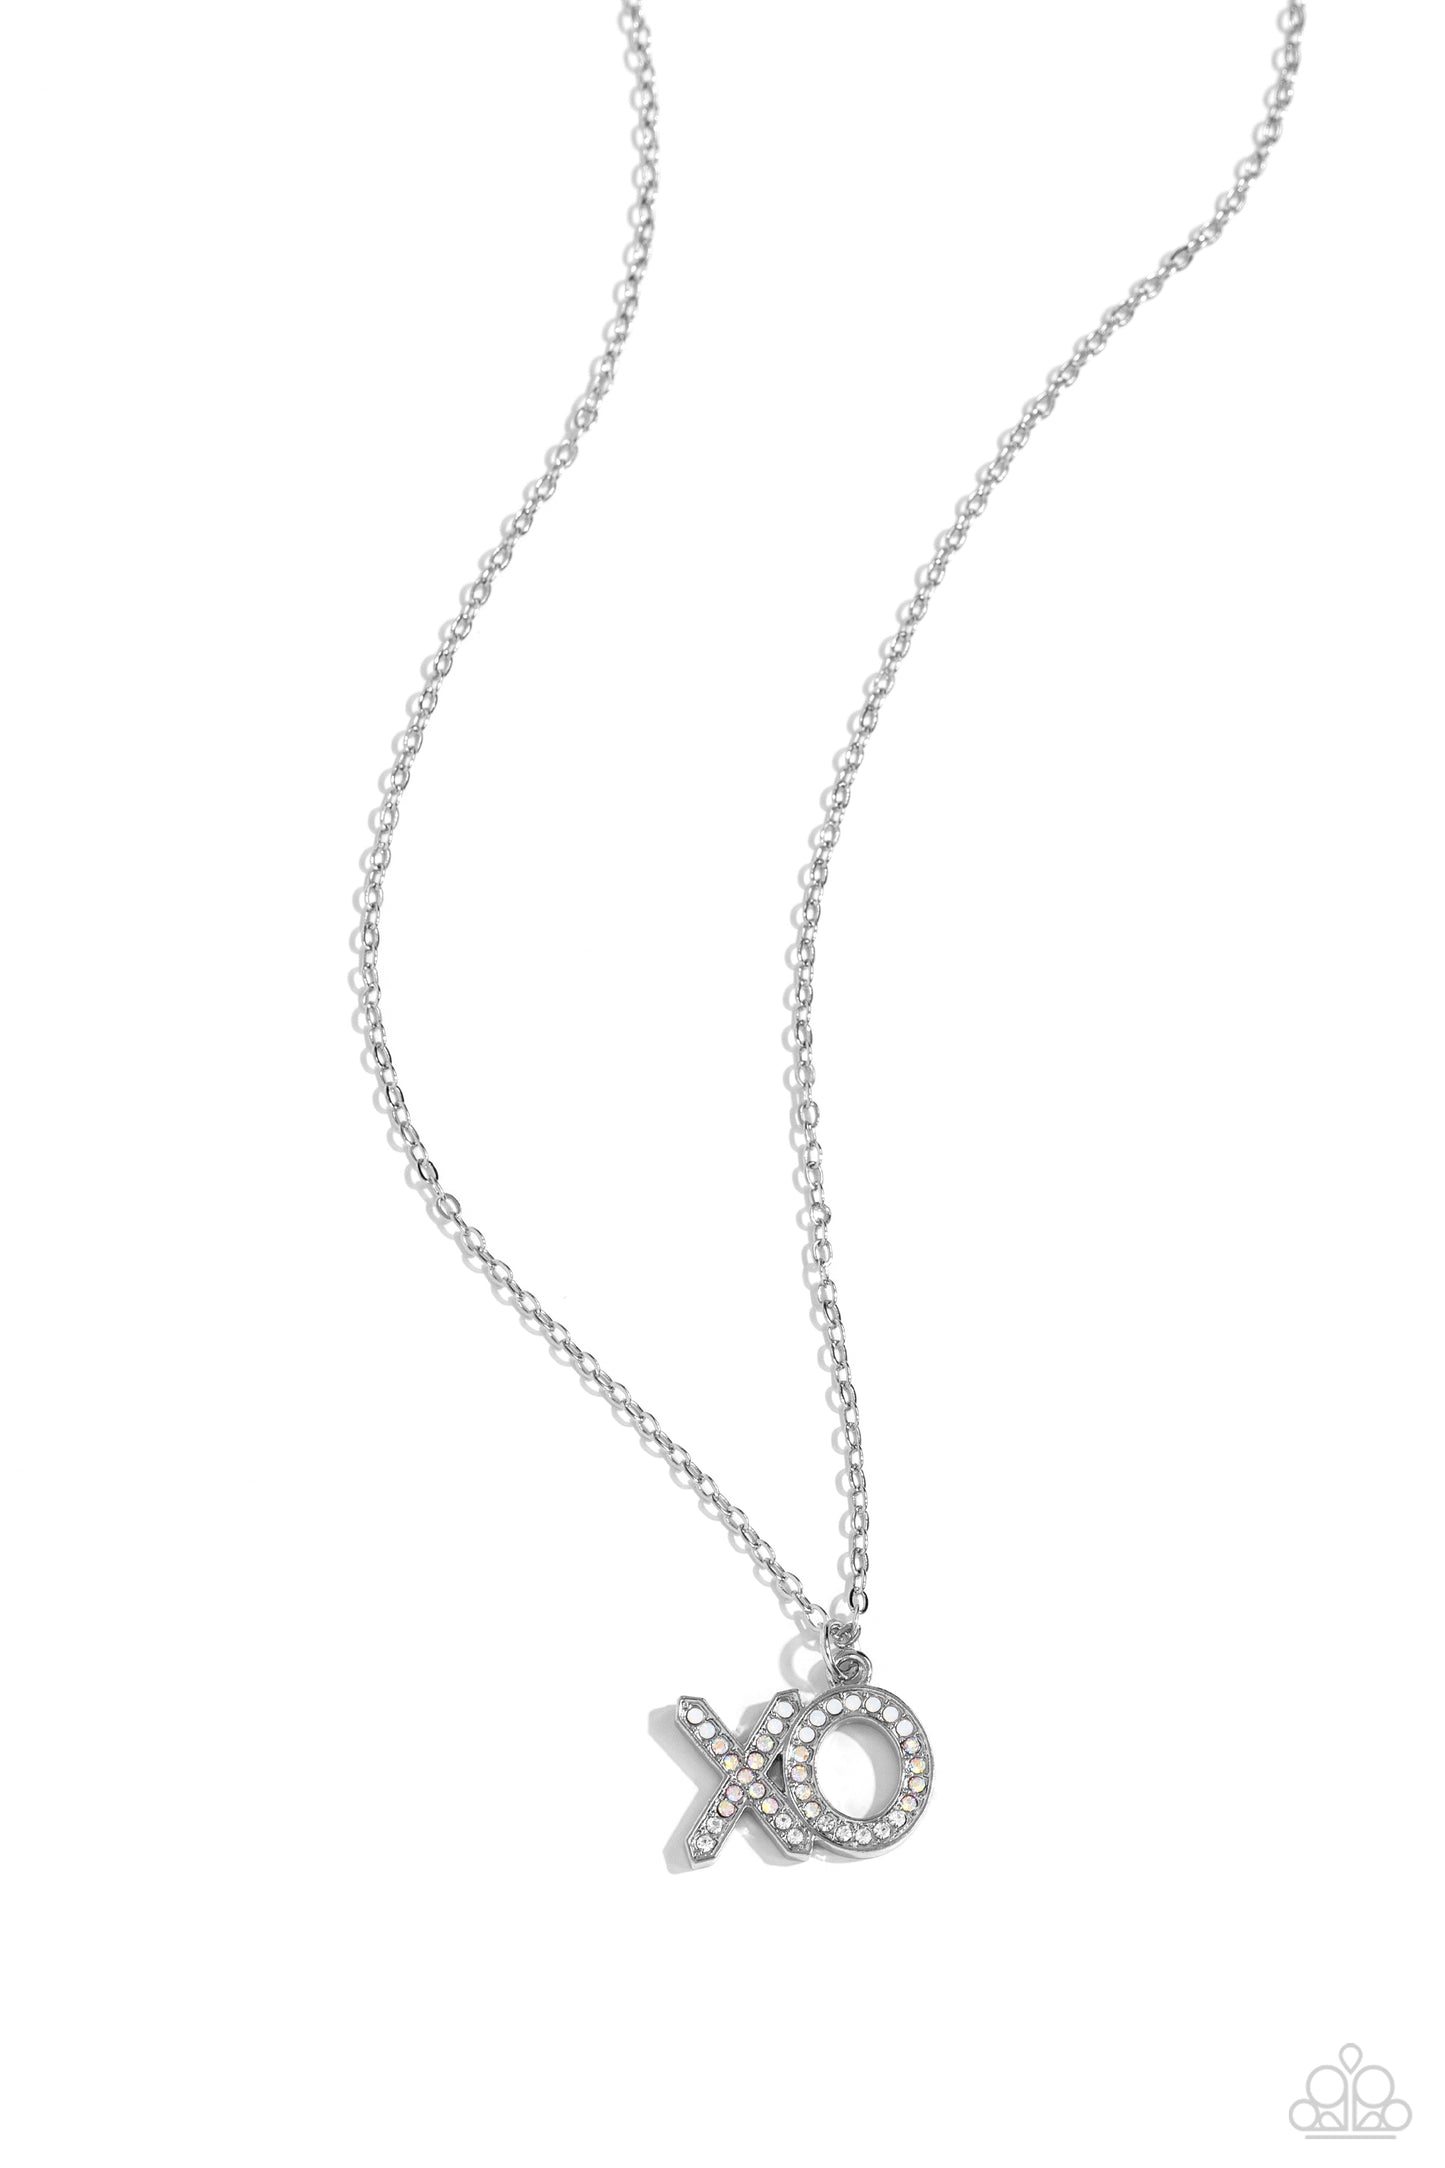 XO Showcase White Necklace - Paparazzi Accessories  Cascading from a dainty silver chain, the silver letters "XO" are embossed in various glistening white rhinestones, creating a romantic ombré statement down the neckline. Features an adjustable clasp closure. Due to its prismatic palette, color may vary.  Sold as one individual necklace. Includes one pair of matching earrings.  SKU: P2WD-WTXX-307XX